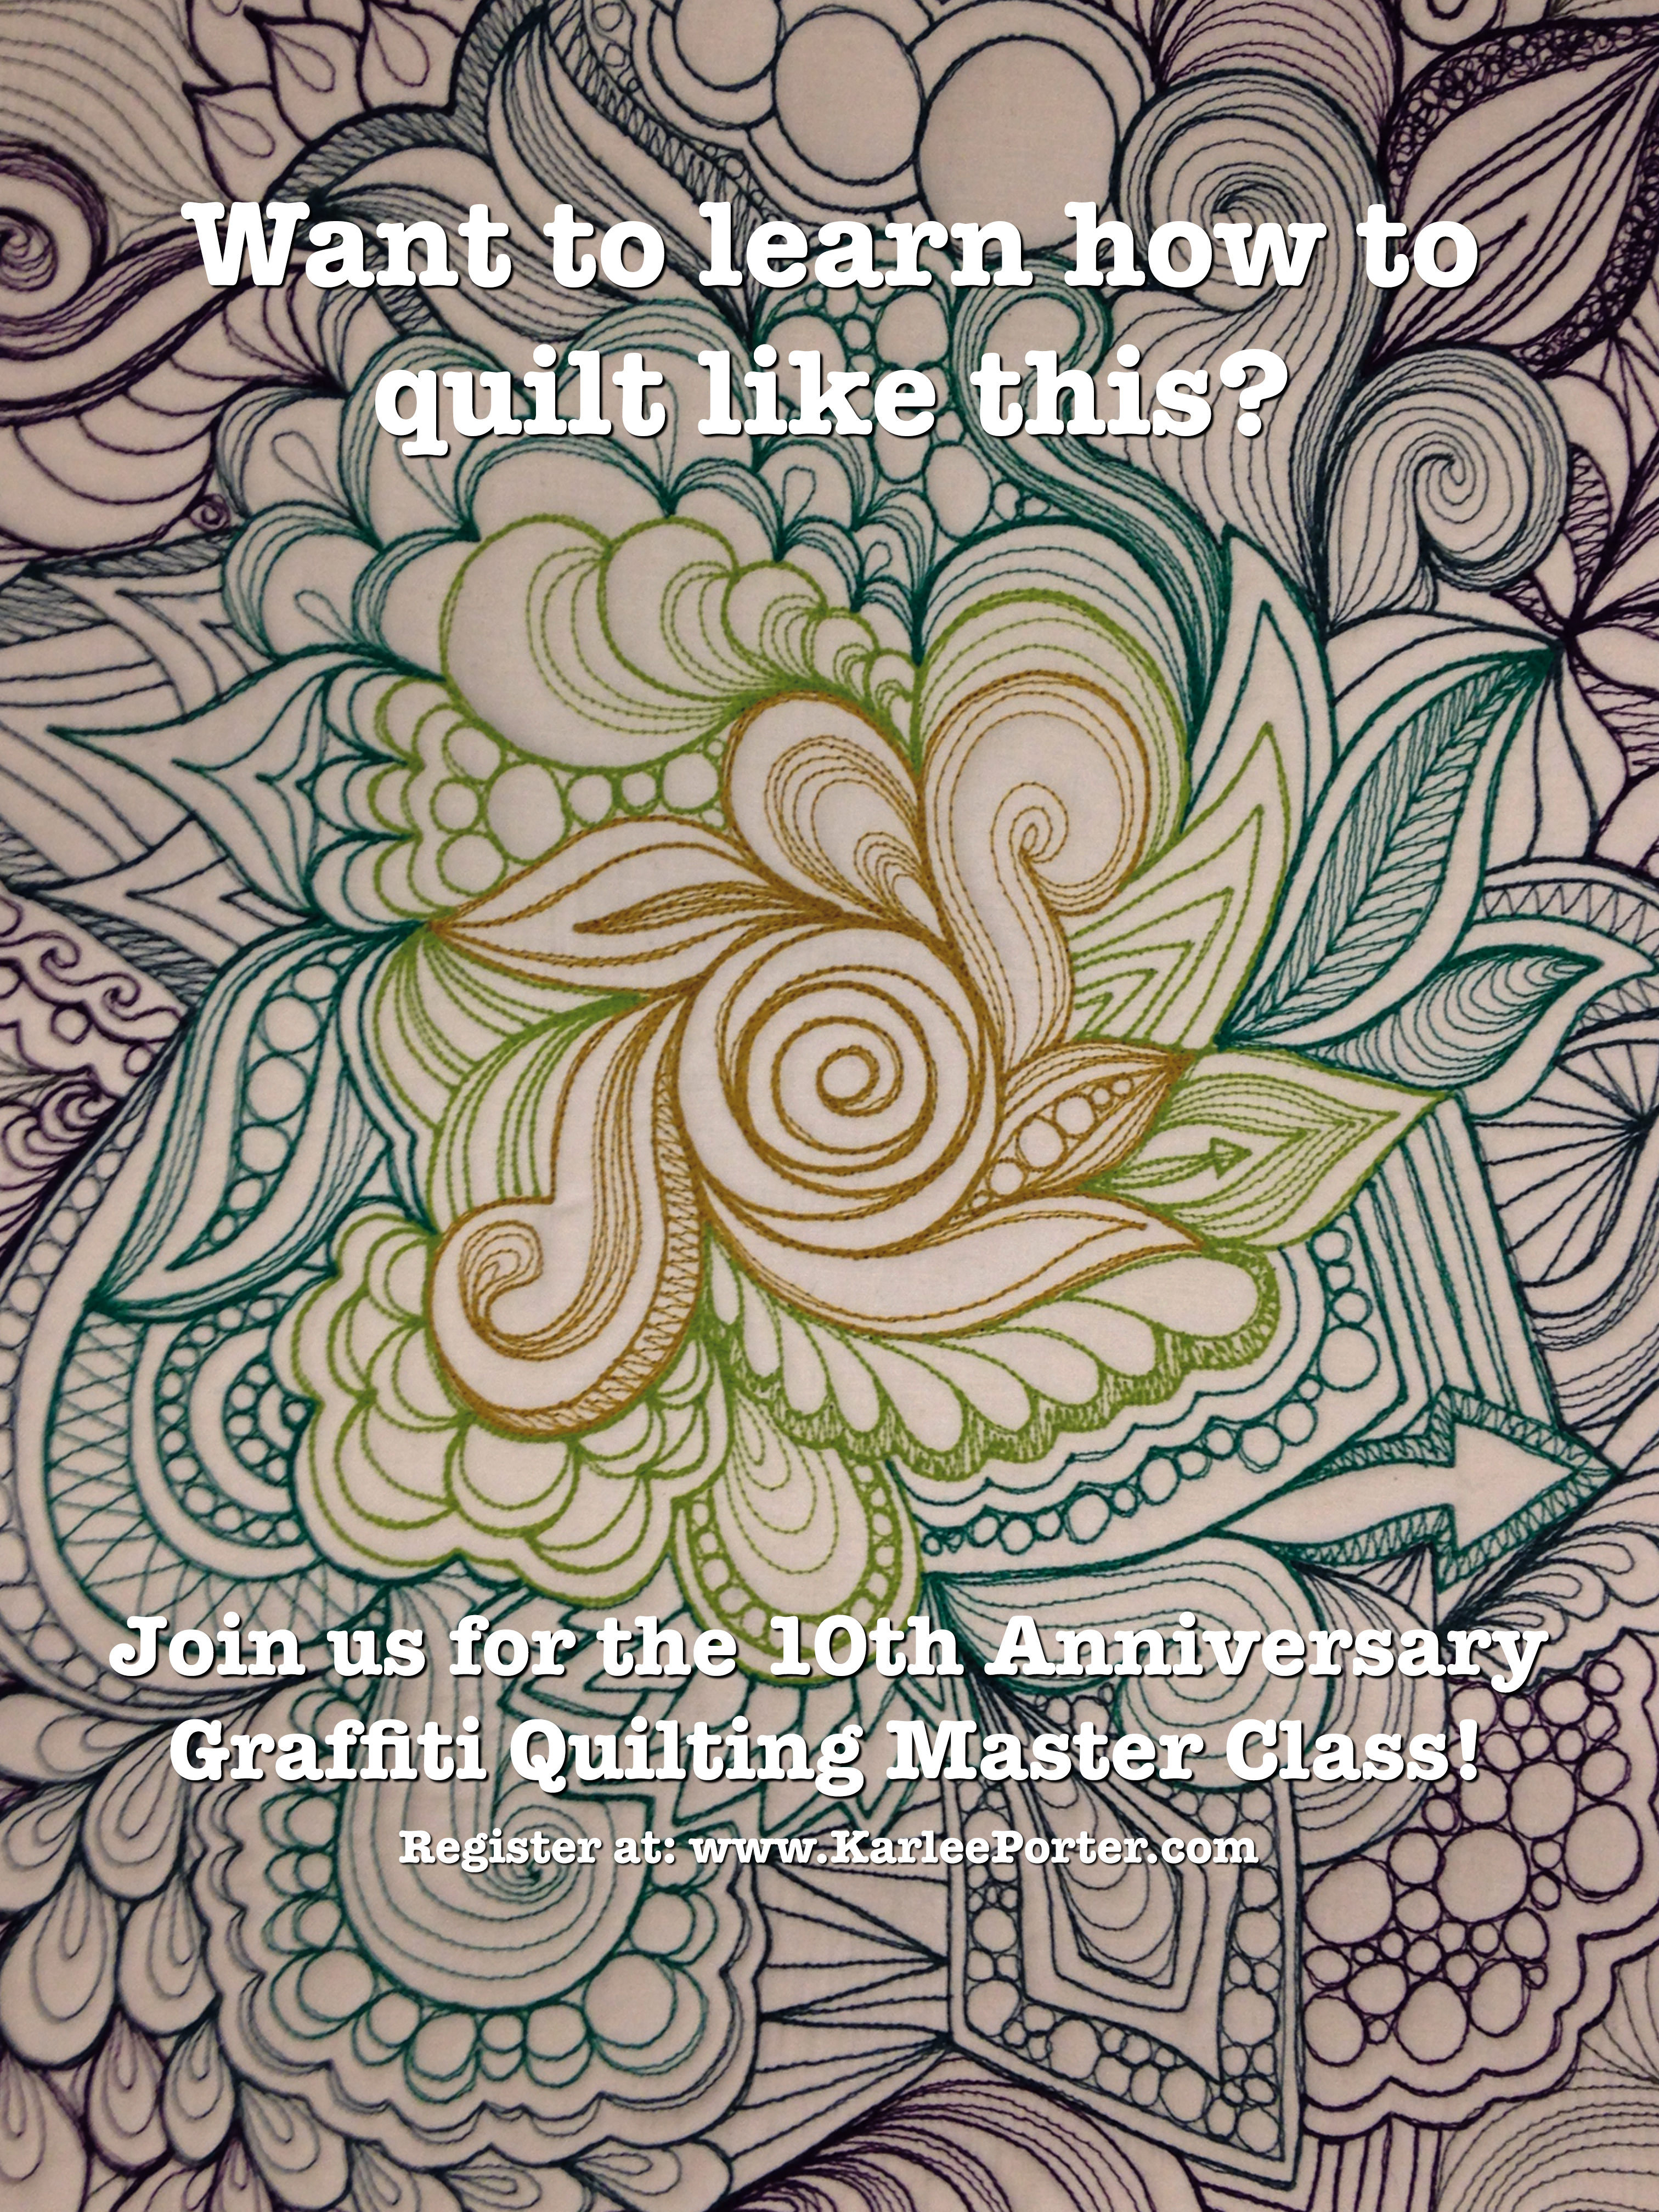 Karlee Porter's Graffiti Quilting Masterclass - Use Code SSQC25 to get $25 off your tuition! thumbnail